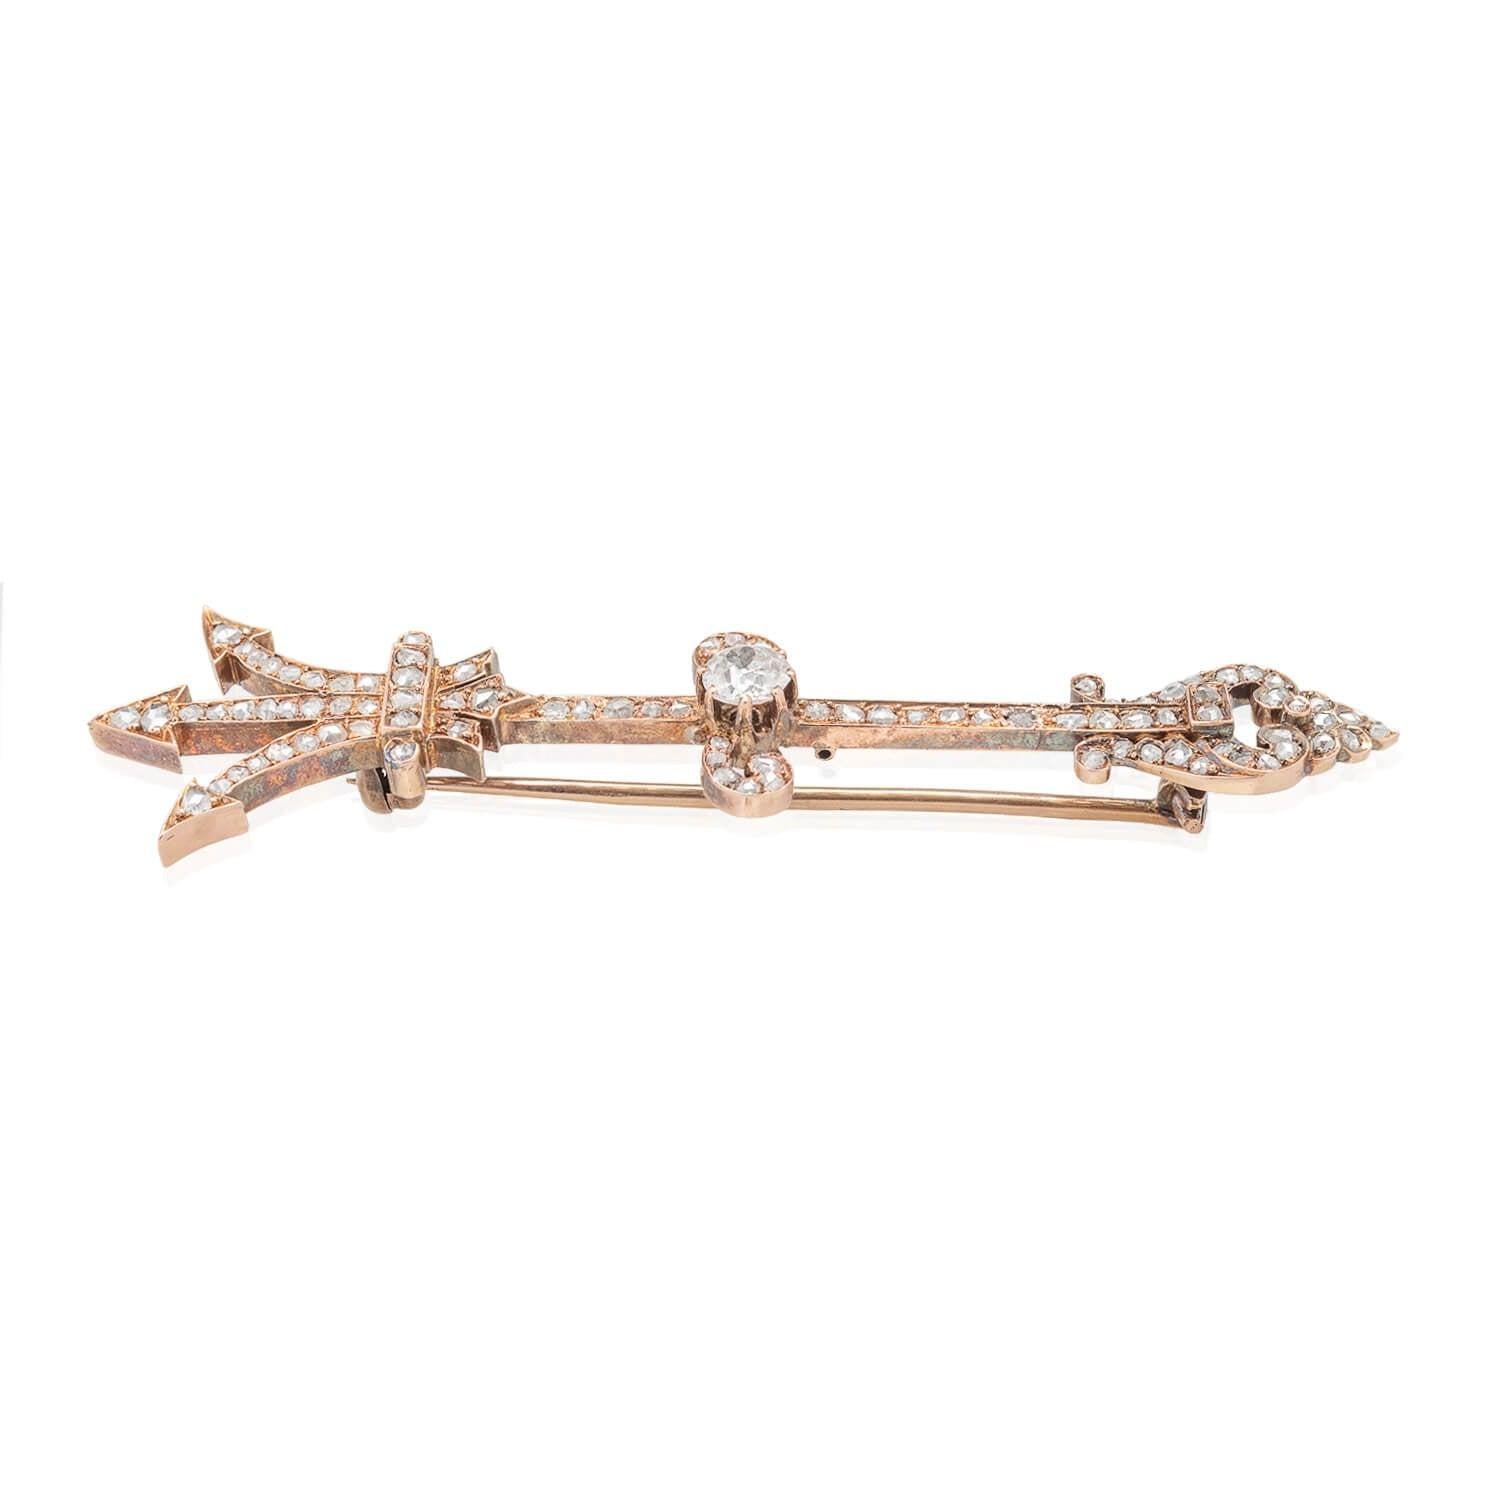 A unique pin from the Victorian (ca1880s) era! Crafted in 18kt rosy gold, this eye-catching piece is in the form of a diamond-encrusted trident. Approximately 0.50ctw of glittering Rose Cut diamonds adorn the surface of the elaborate hilt and the